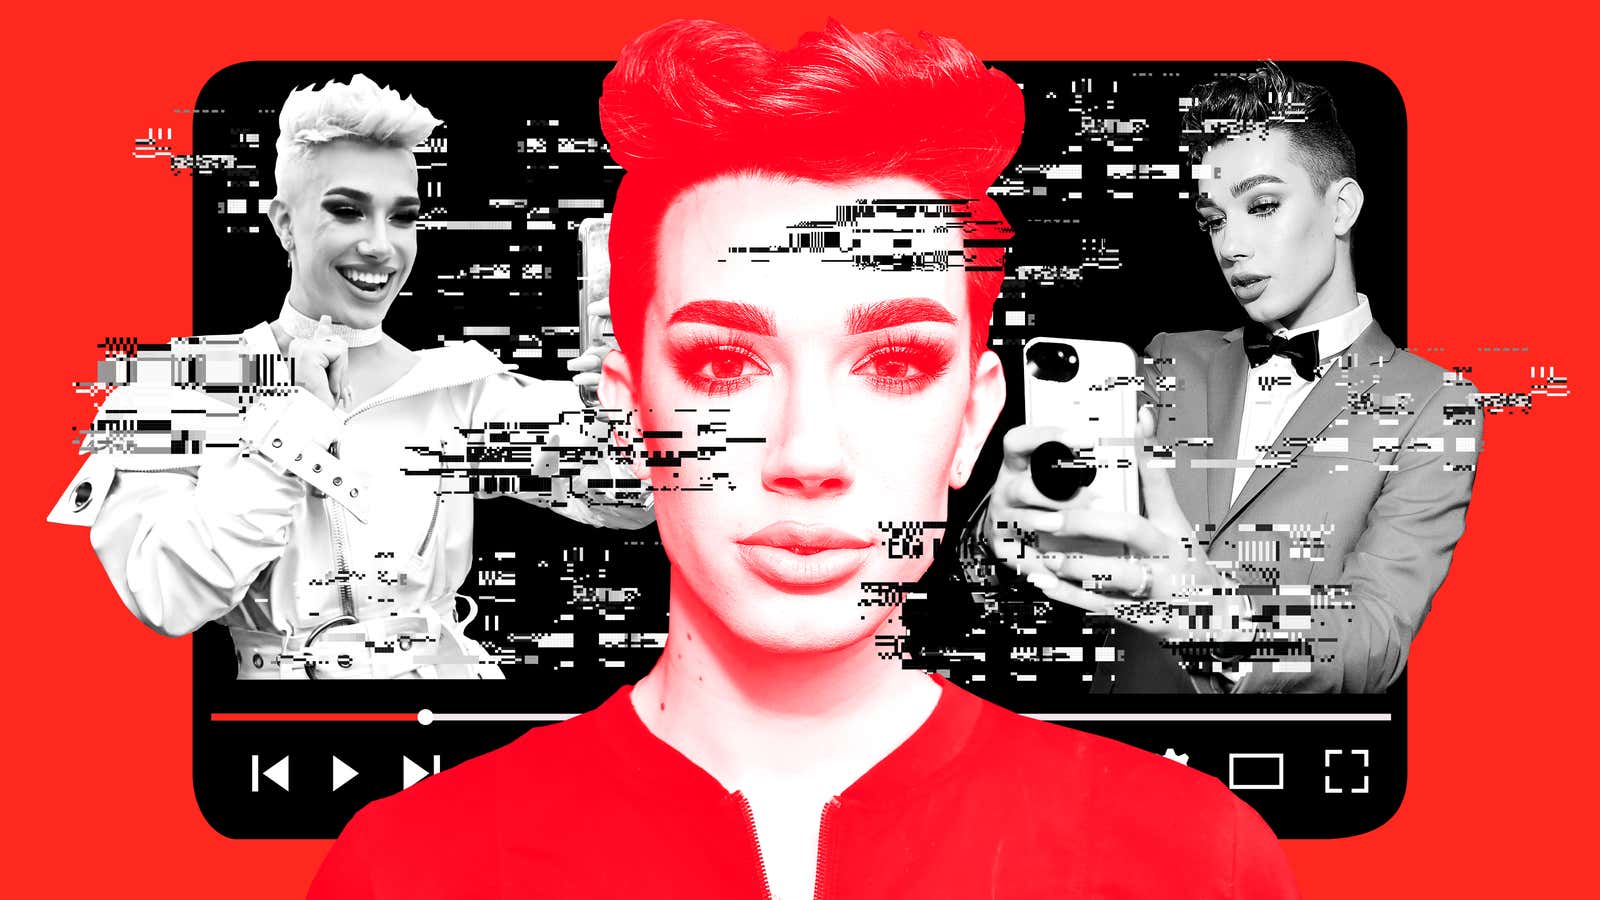 The Feuds, Fights, and Petty Drama That Made James Charles a YouTube Celebrity